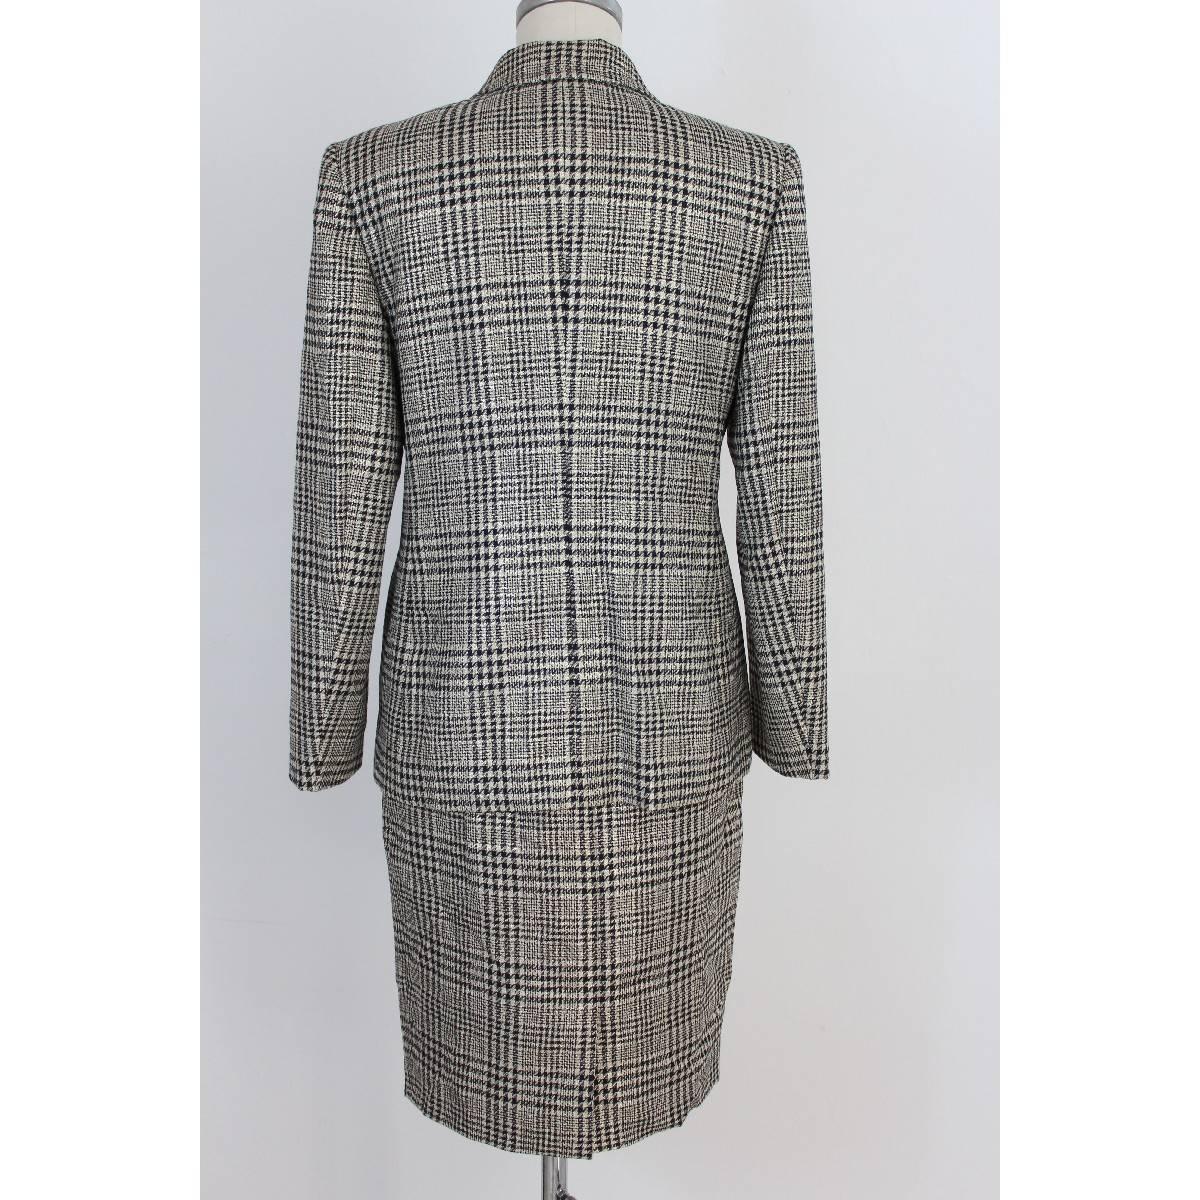 Valentino Pied De Poule Gray Wool Italian Skirt Suit, 1990s size 8 In New Condition For Sale In Brindisi, IT